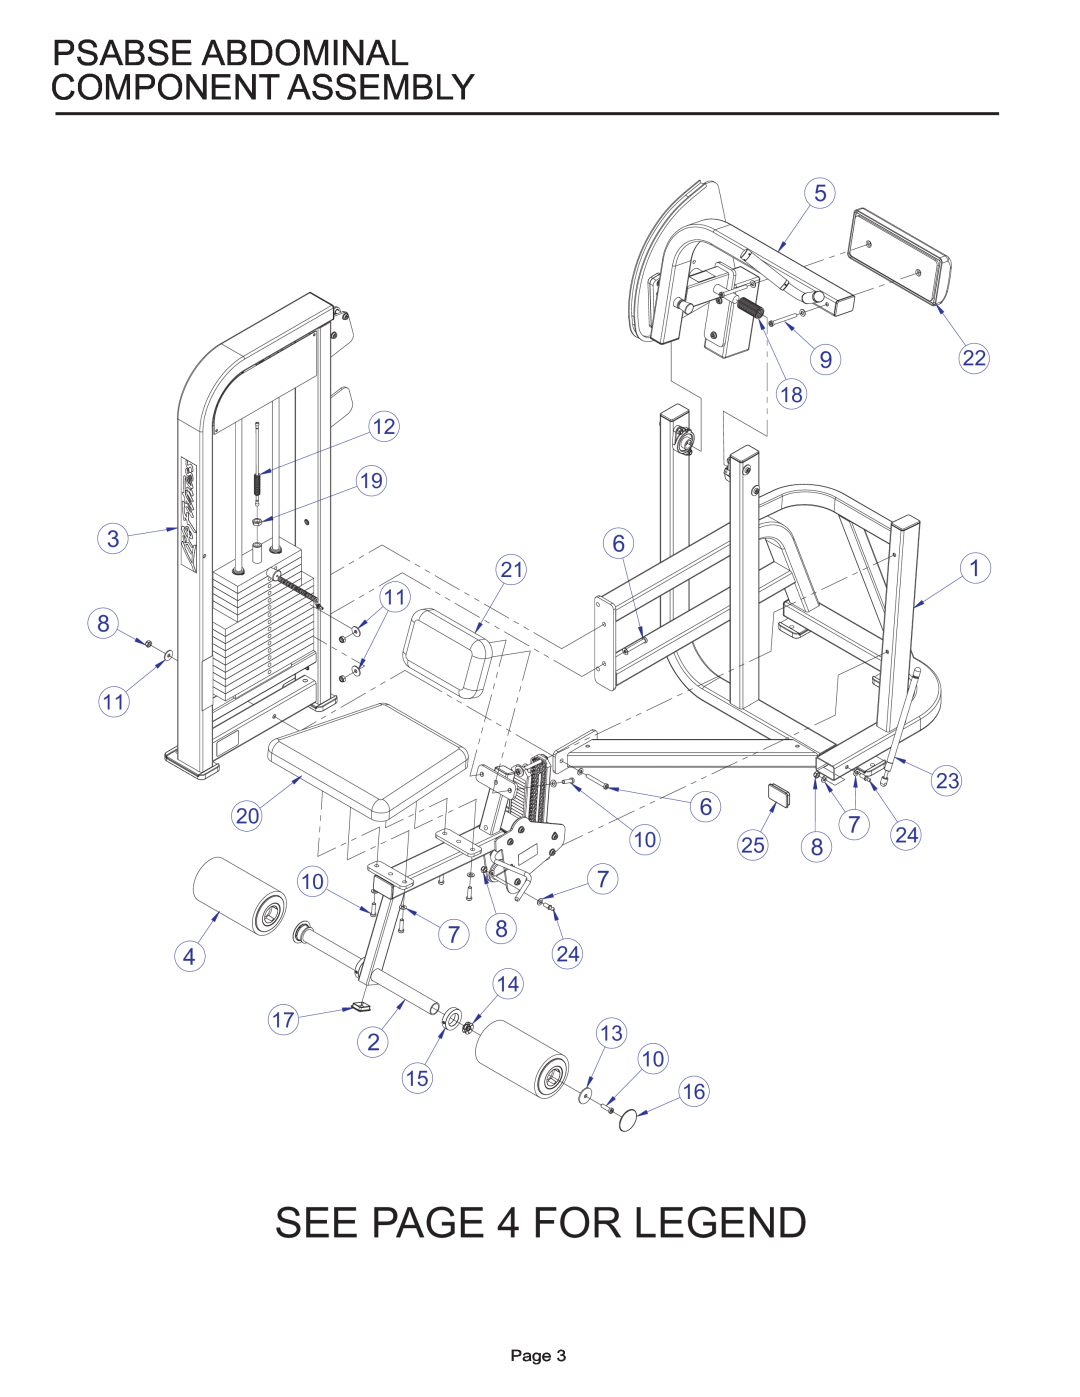 Life Fitness PSABSE manual SEE PAGE 4 FOR LEGEND, Psabse Abdominal Component Assembly, Page 